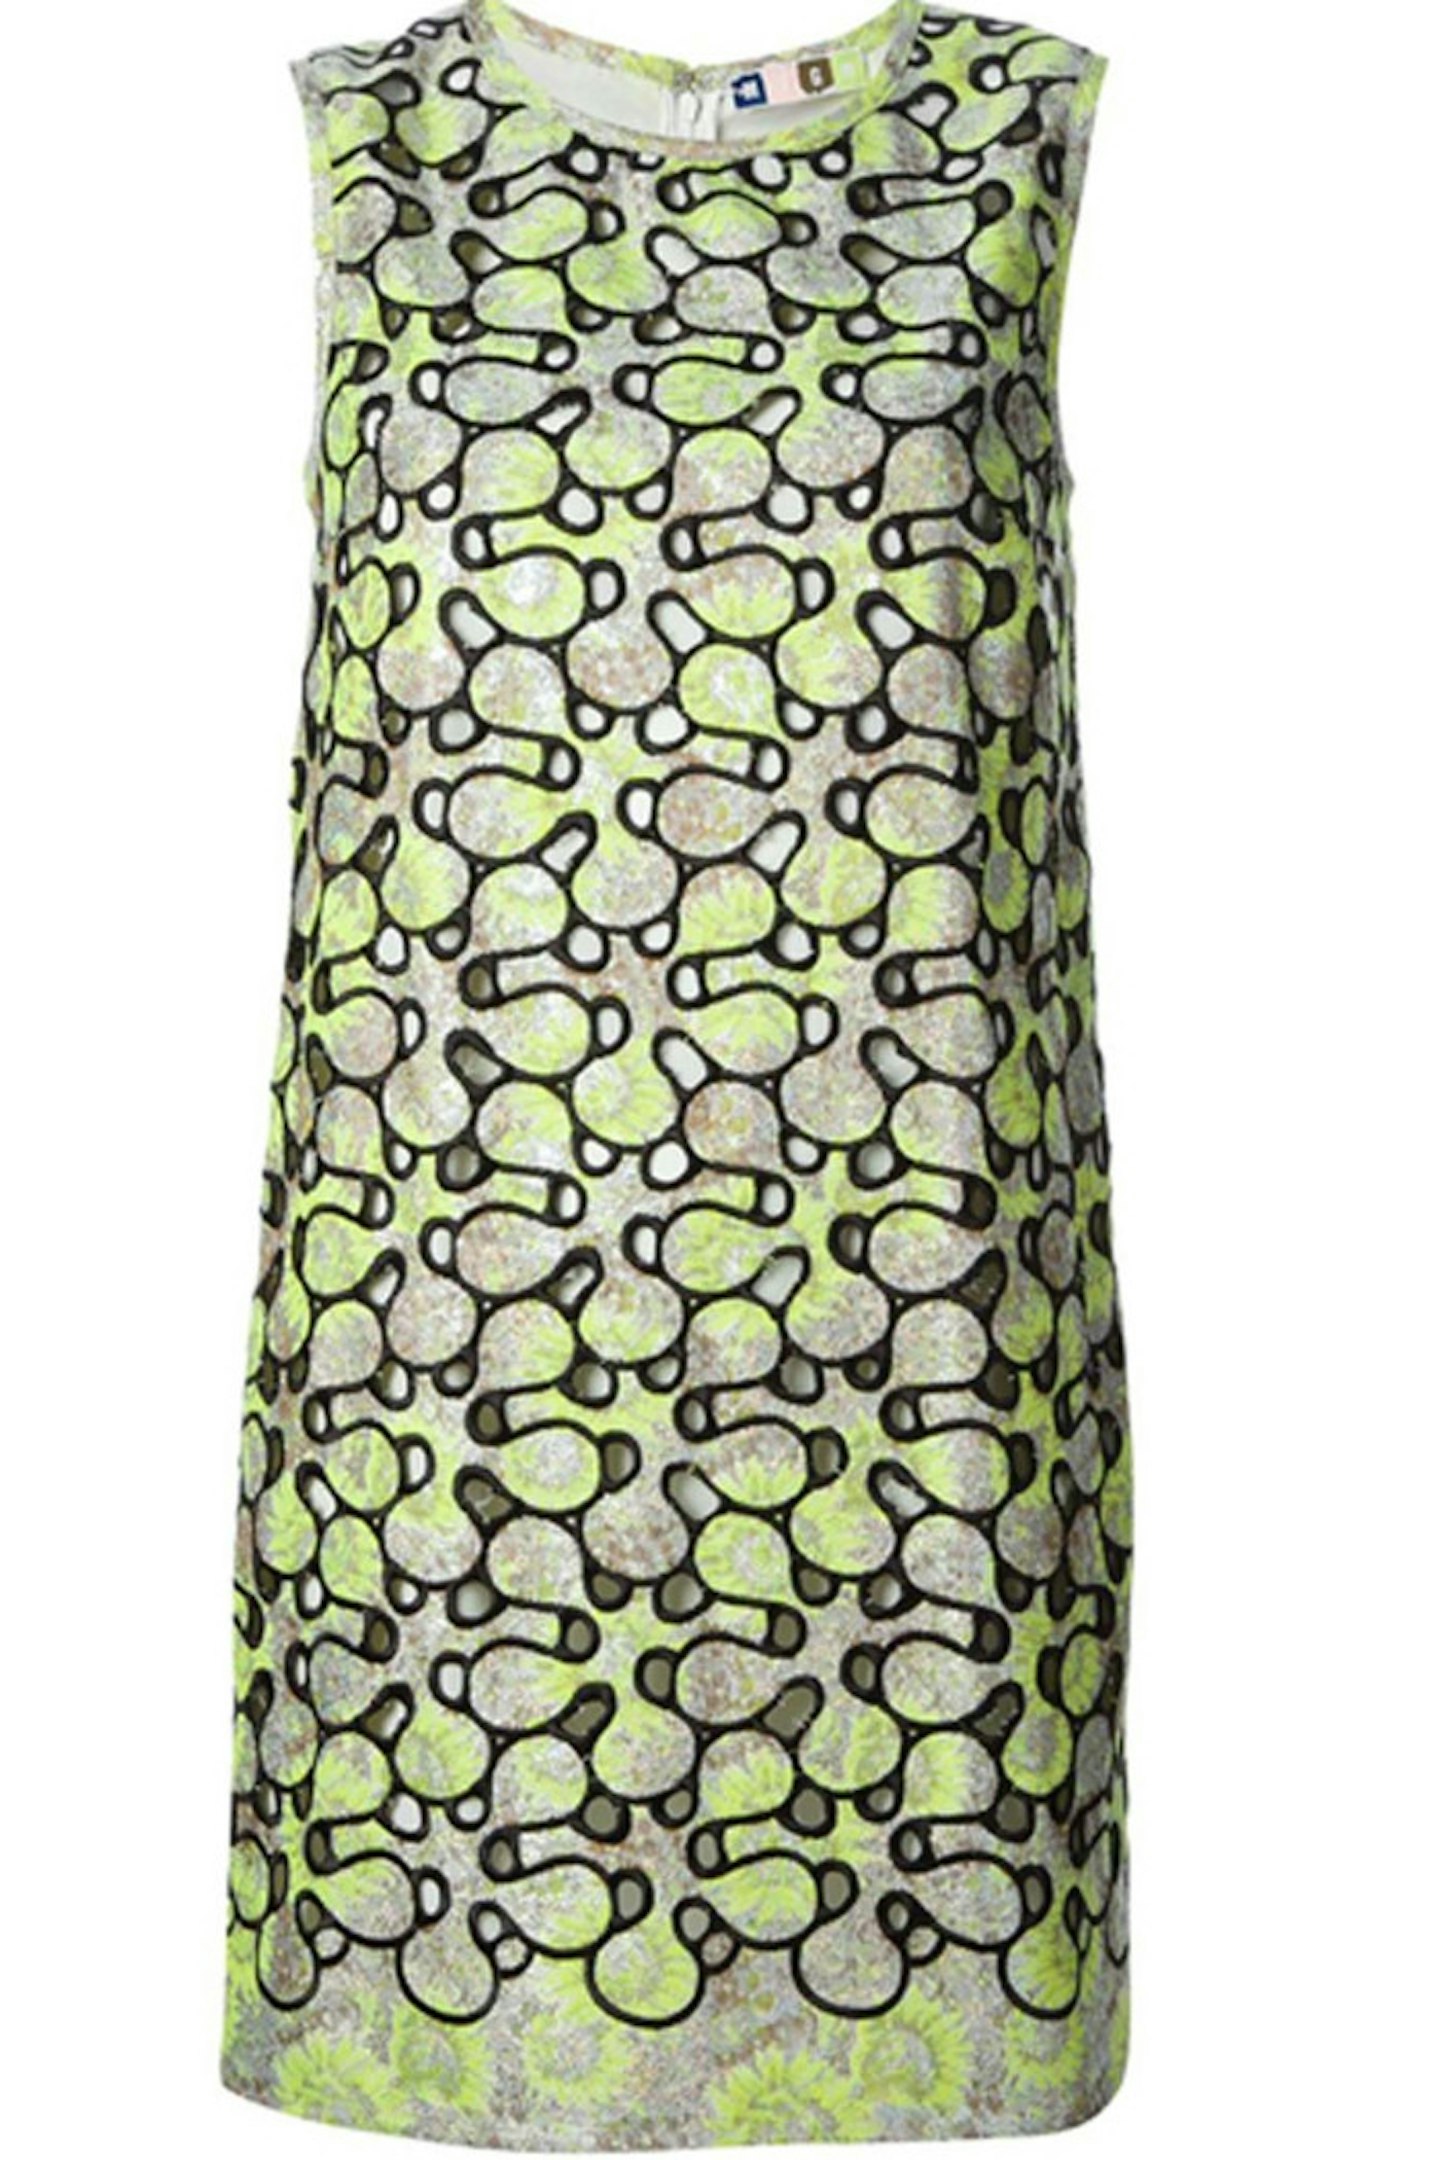 34. Embroidered Floral Shift Dress, £219.92, MSGM at Farfetch